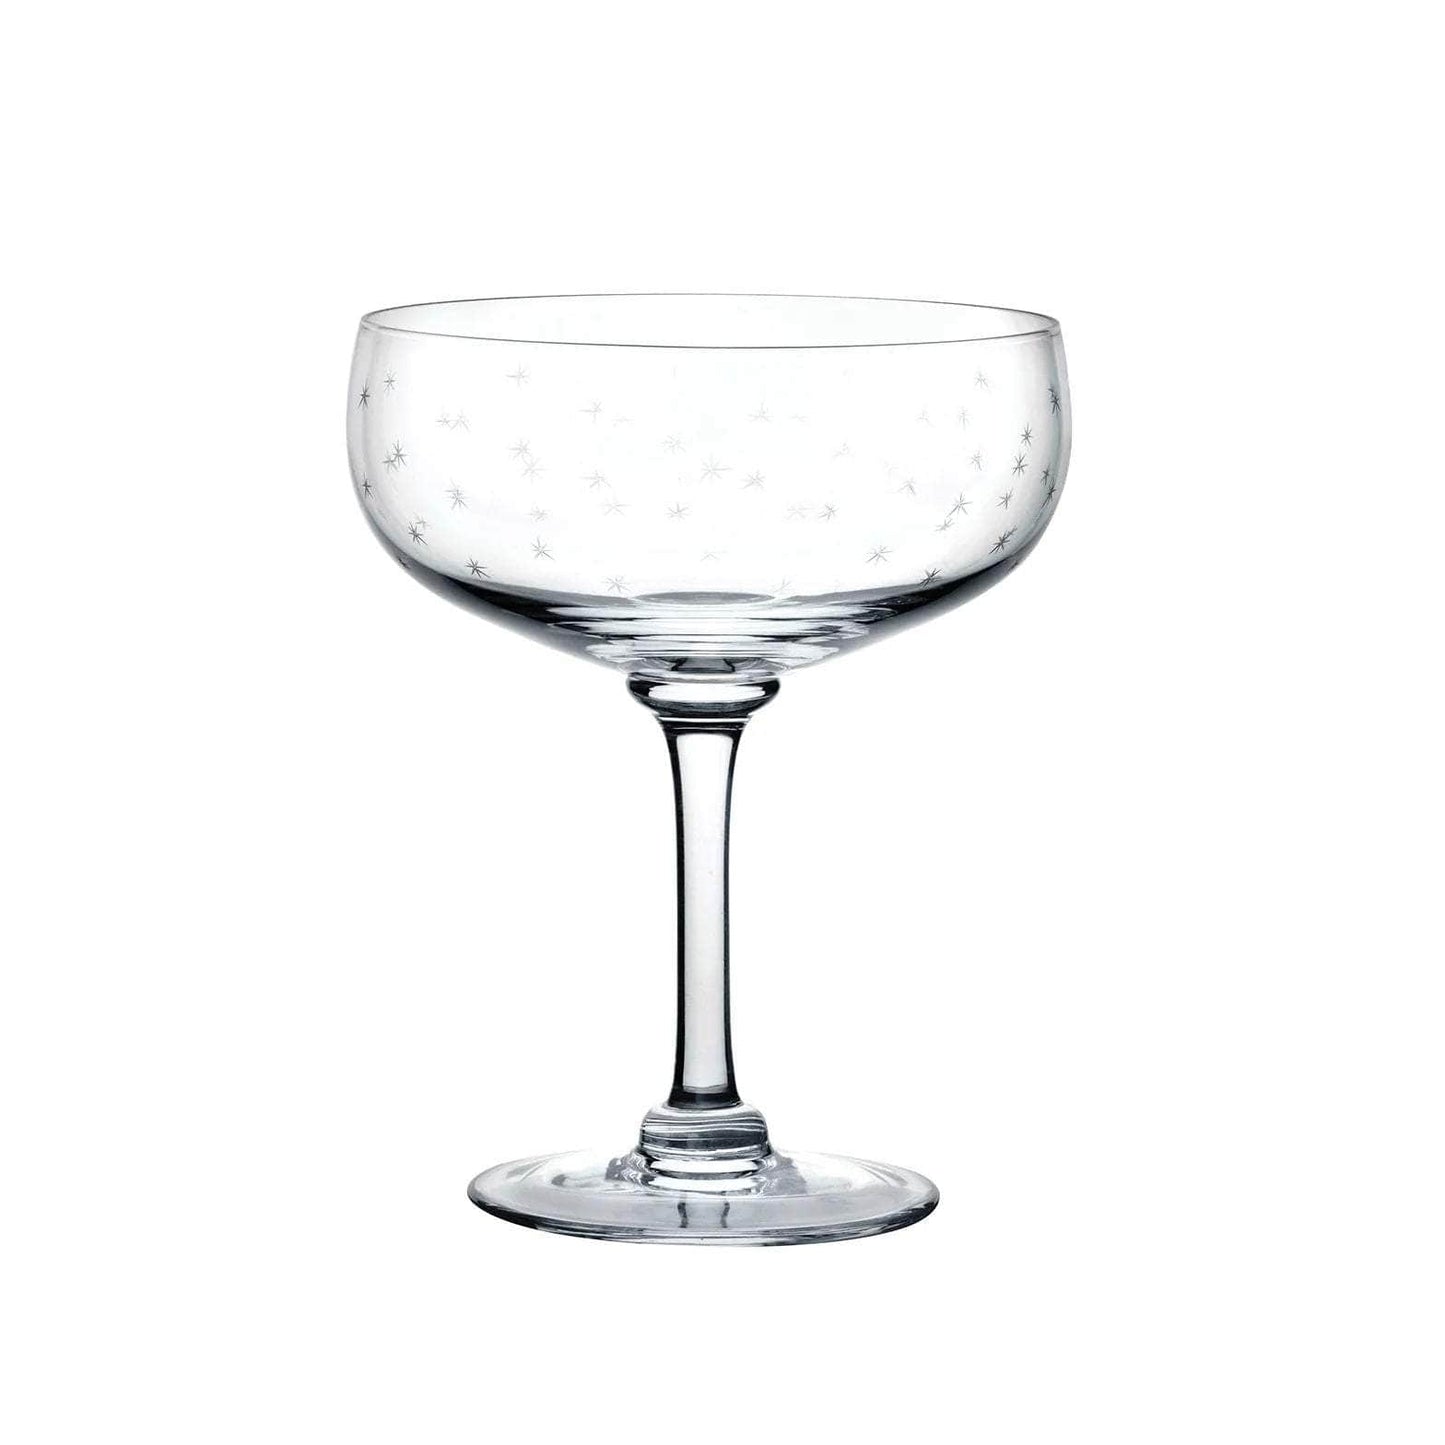 Crystal Cocktail Glasses with Stars Design